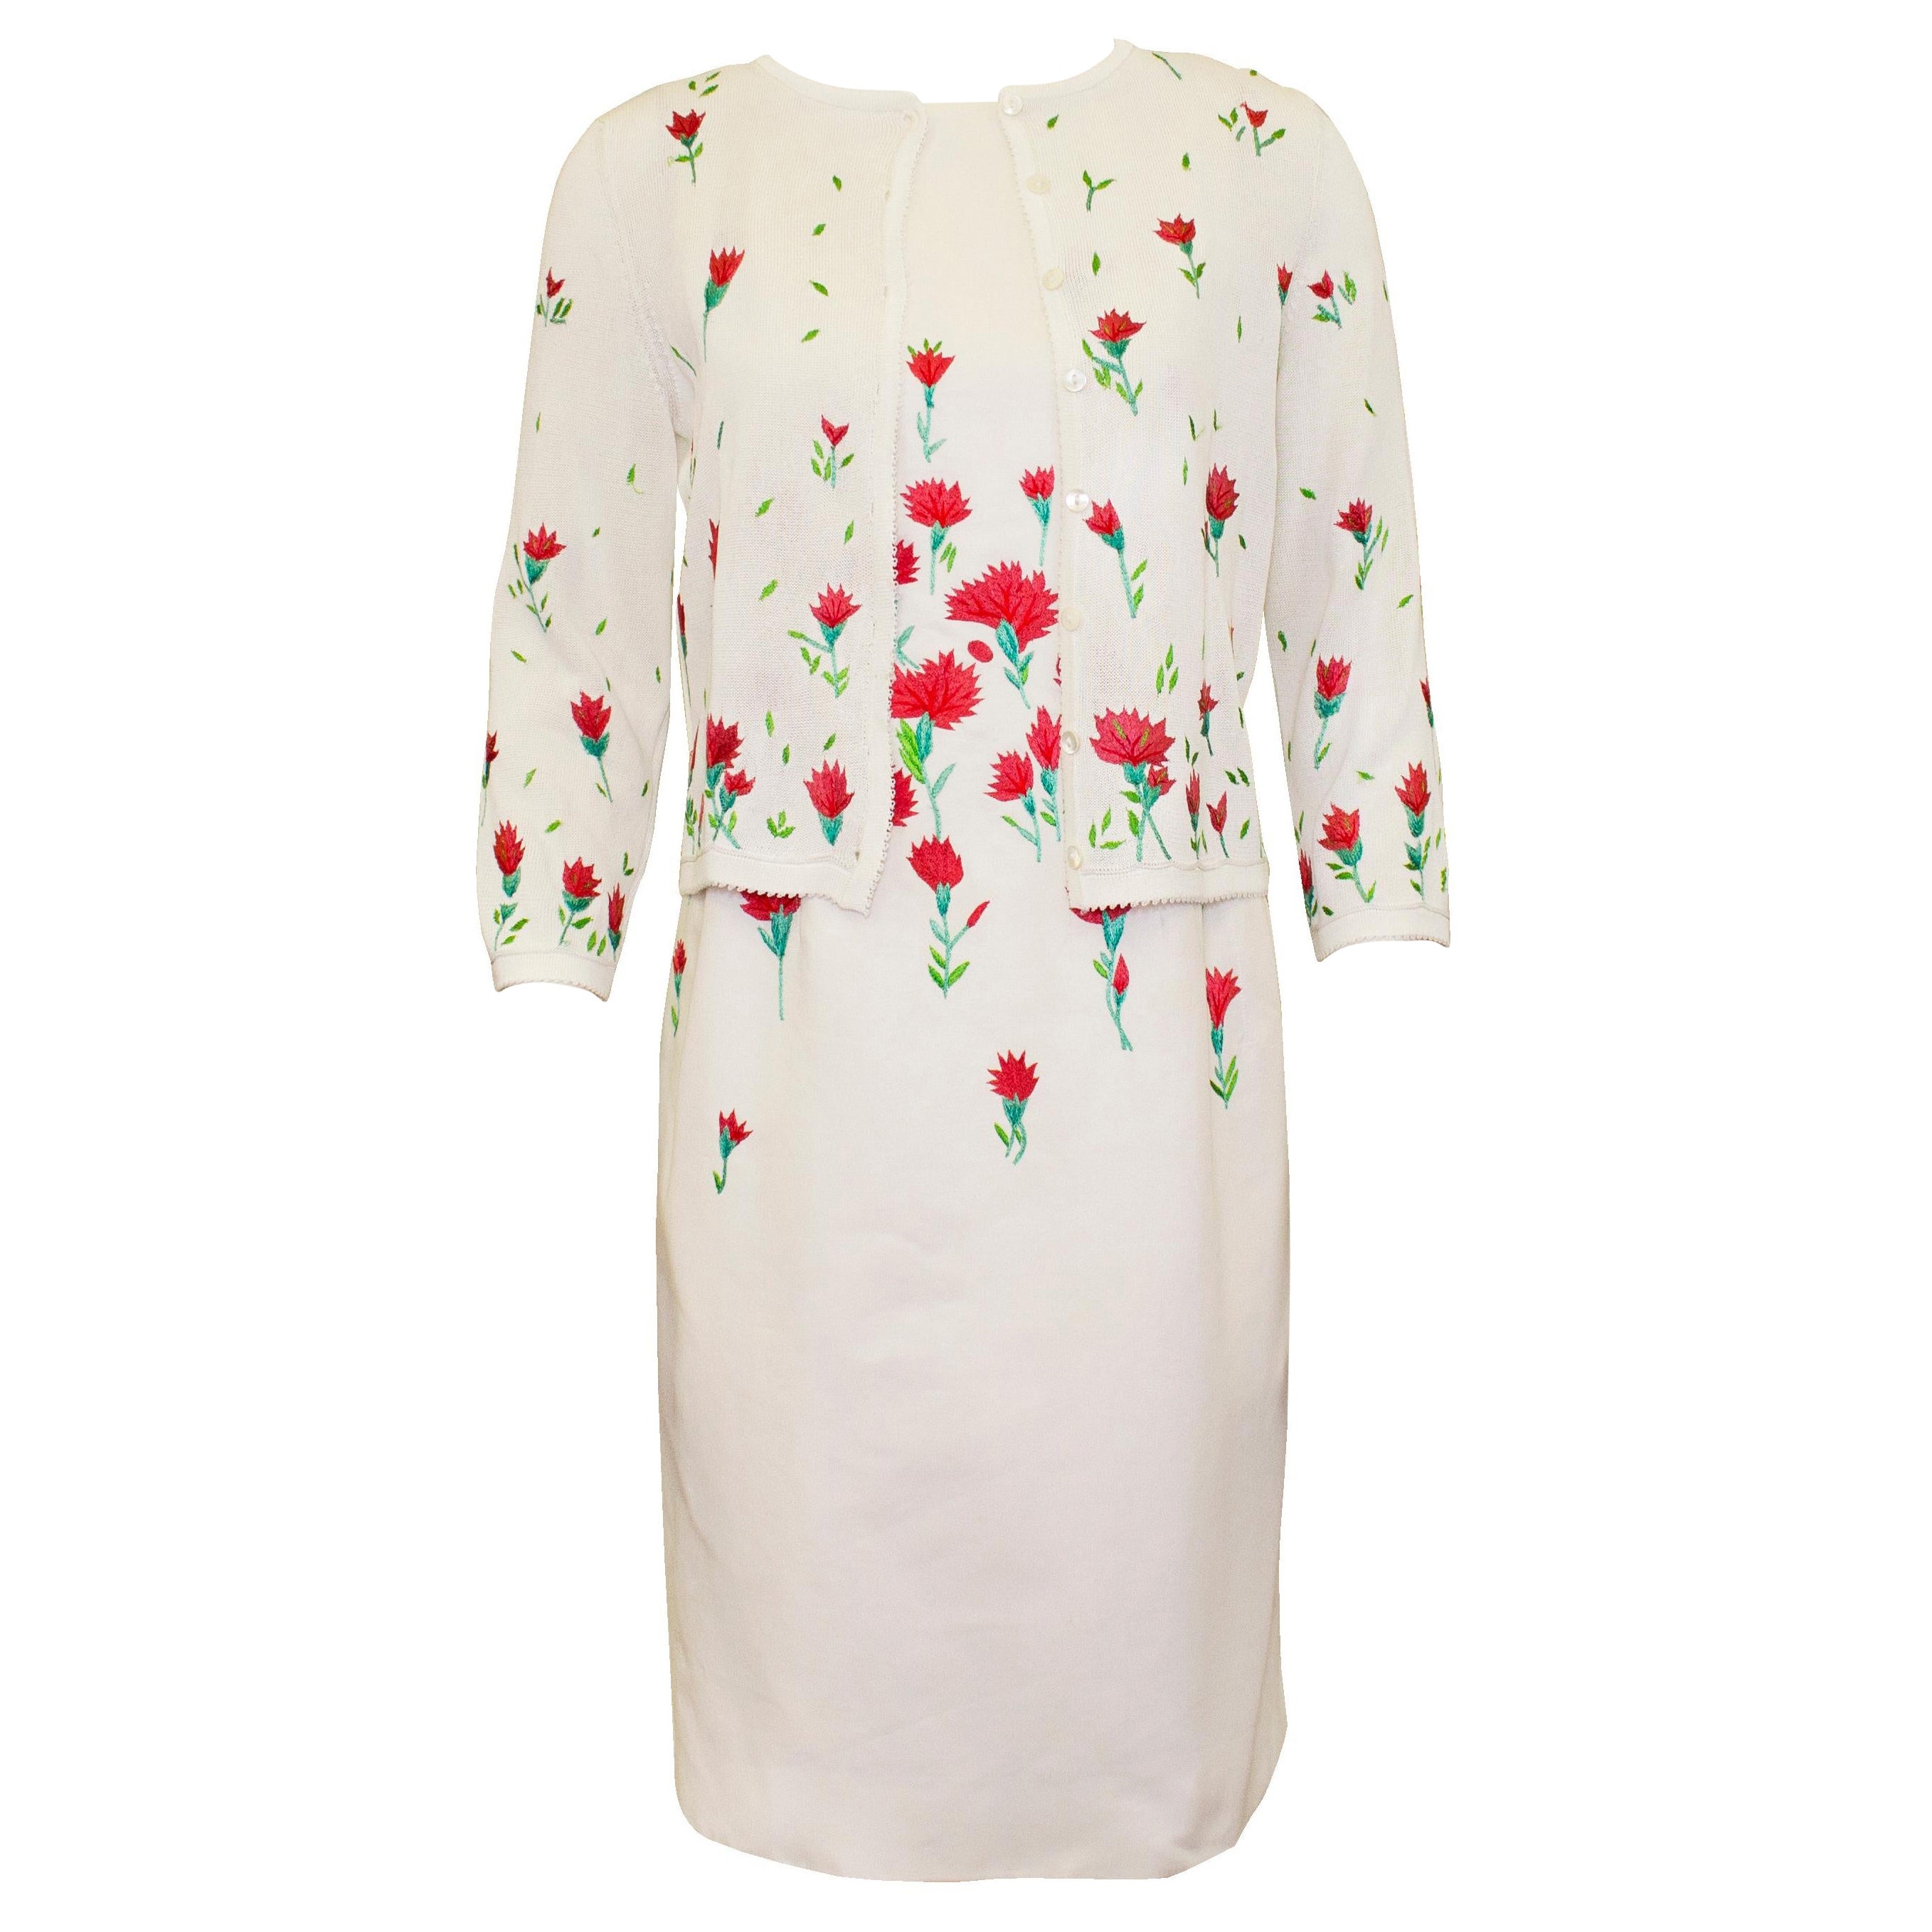 Early 2000s Oscar de la Renta Carnation Embroidered Dress and Cardigan Ensemble  For Sale